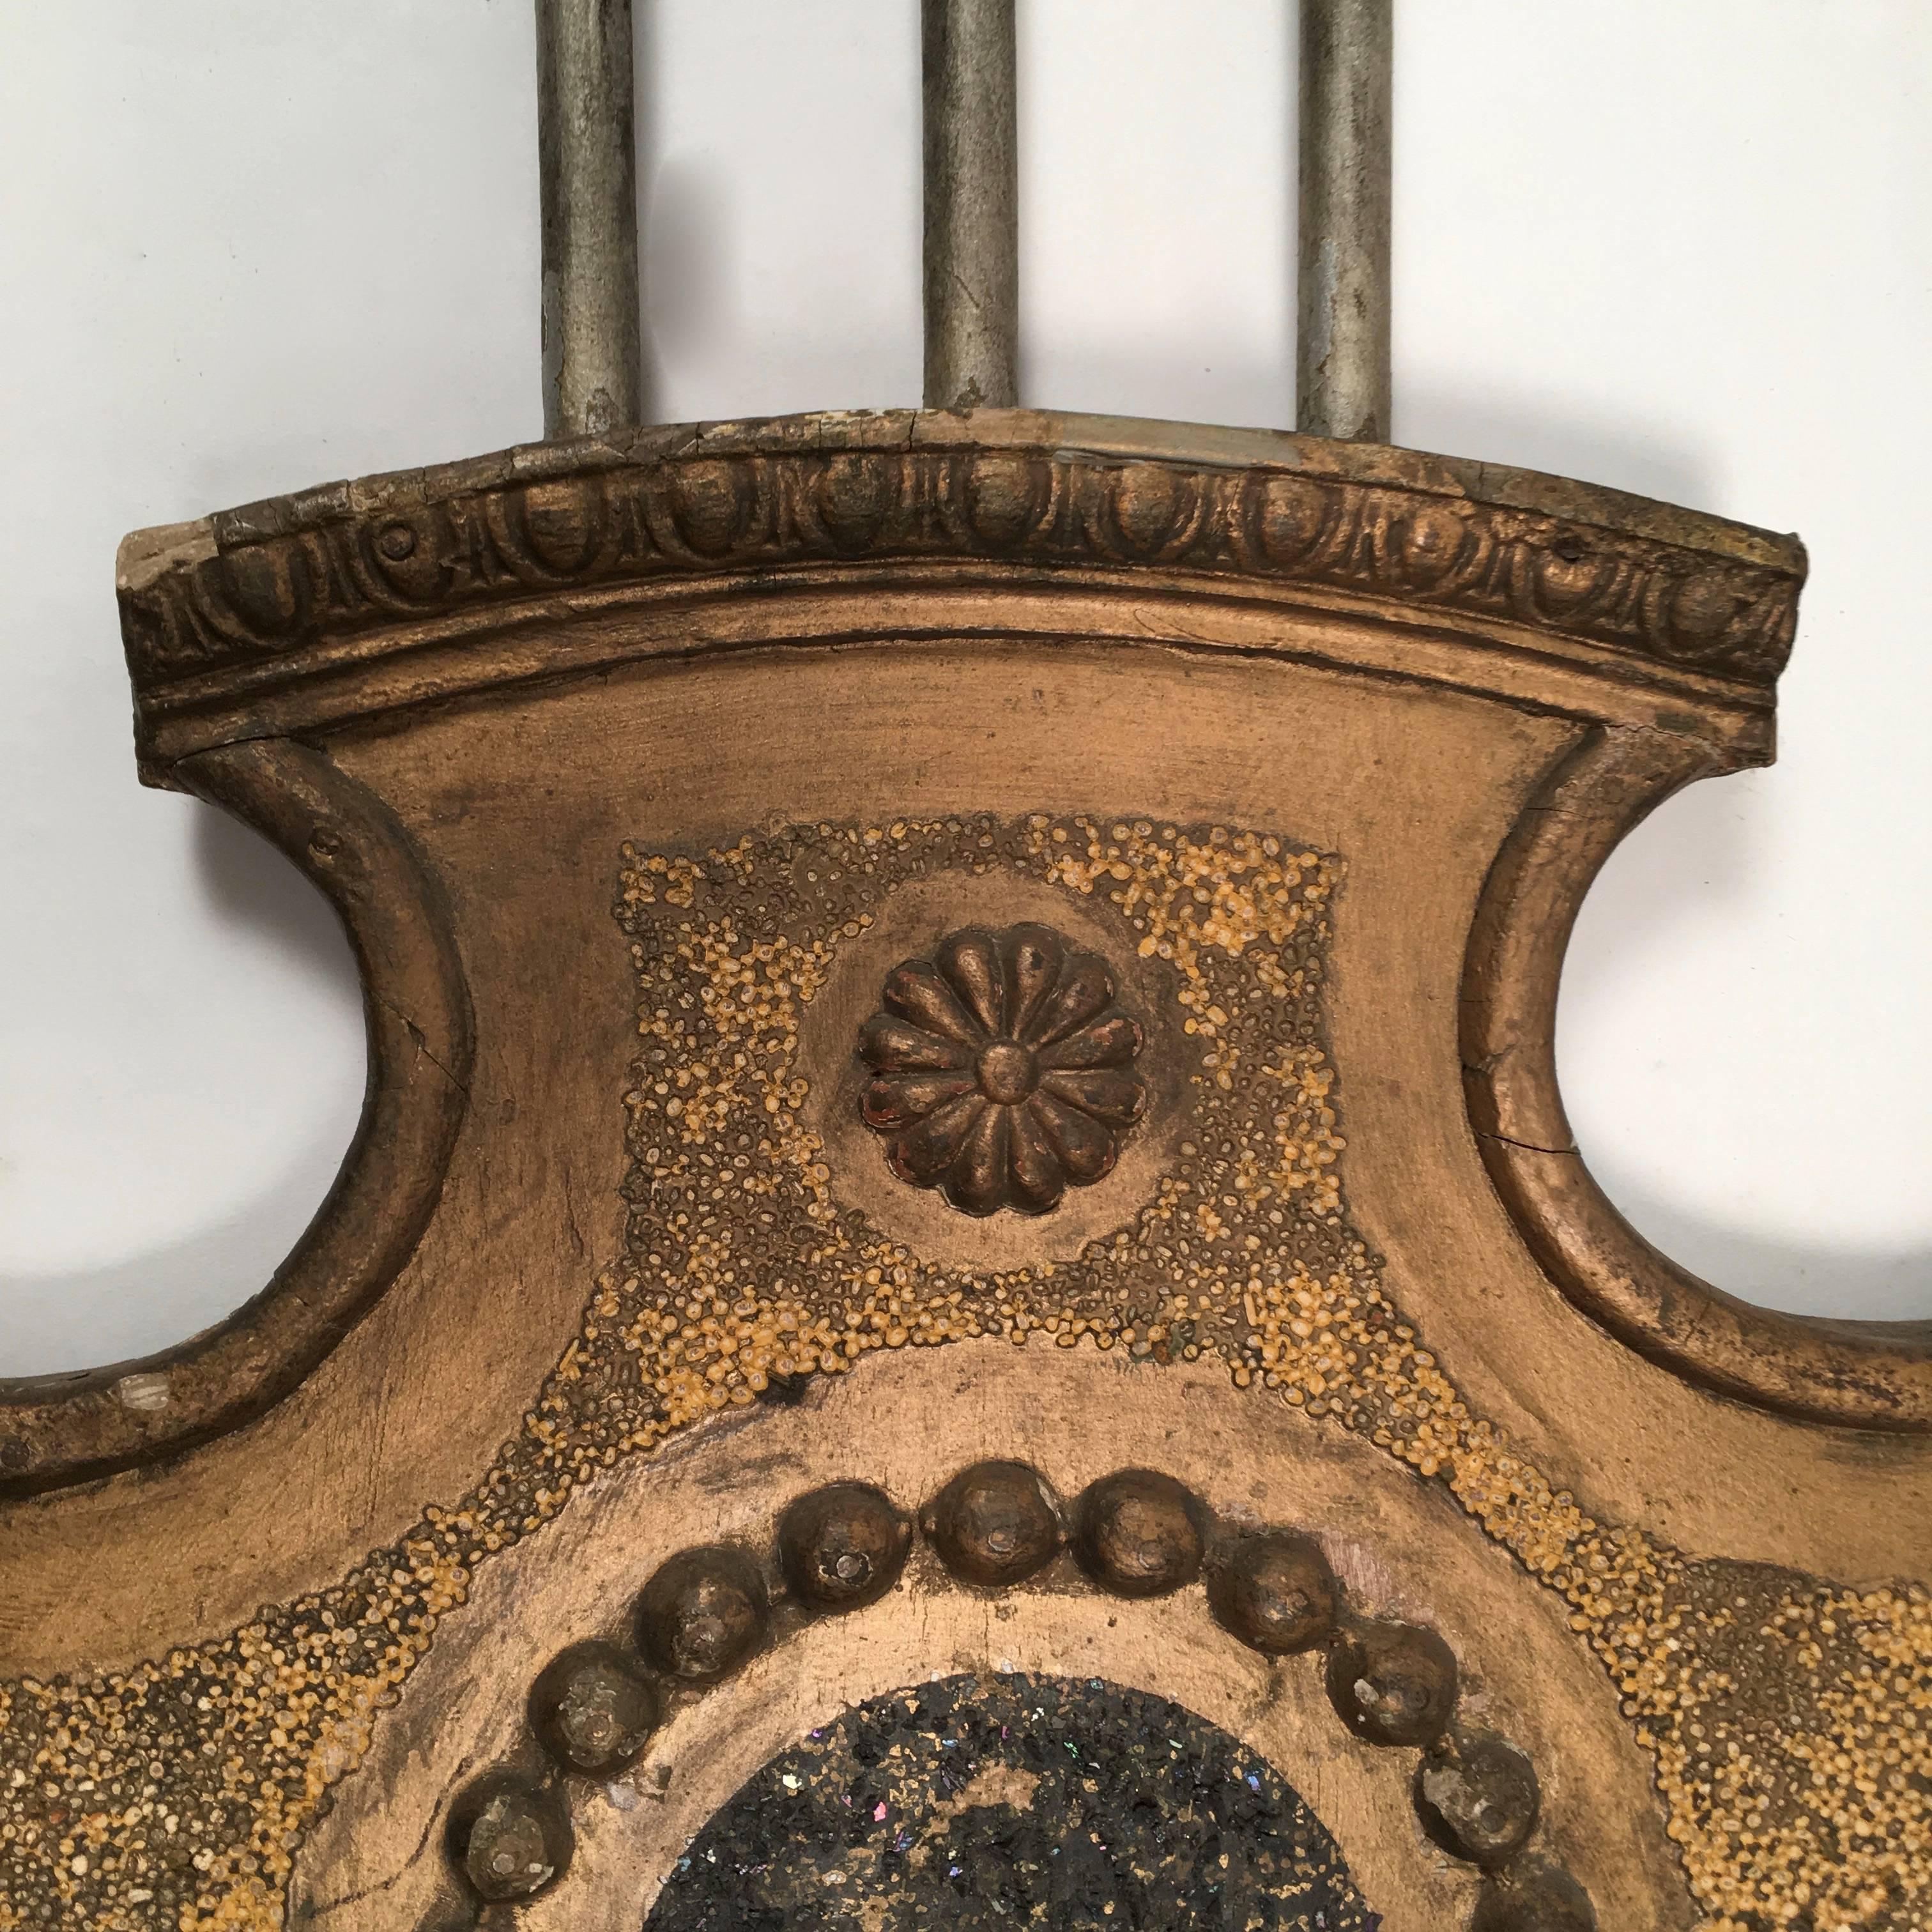 Late 19th Century Large Neoclassical Lyre Wall Decoration from a Music Hall